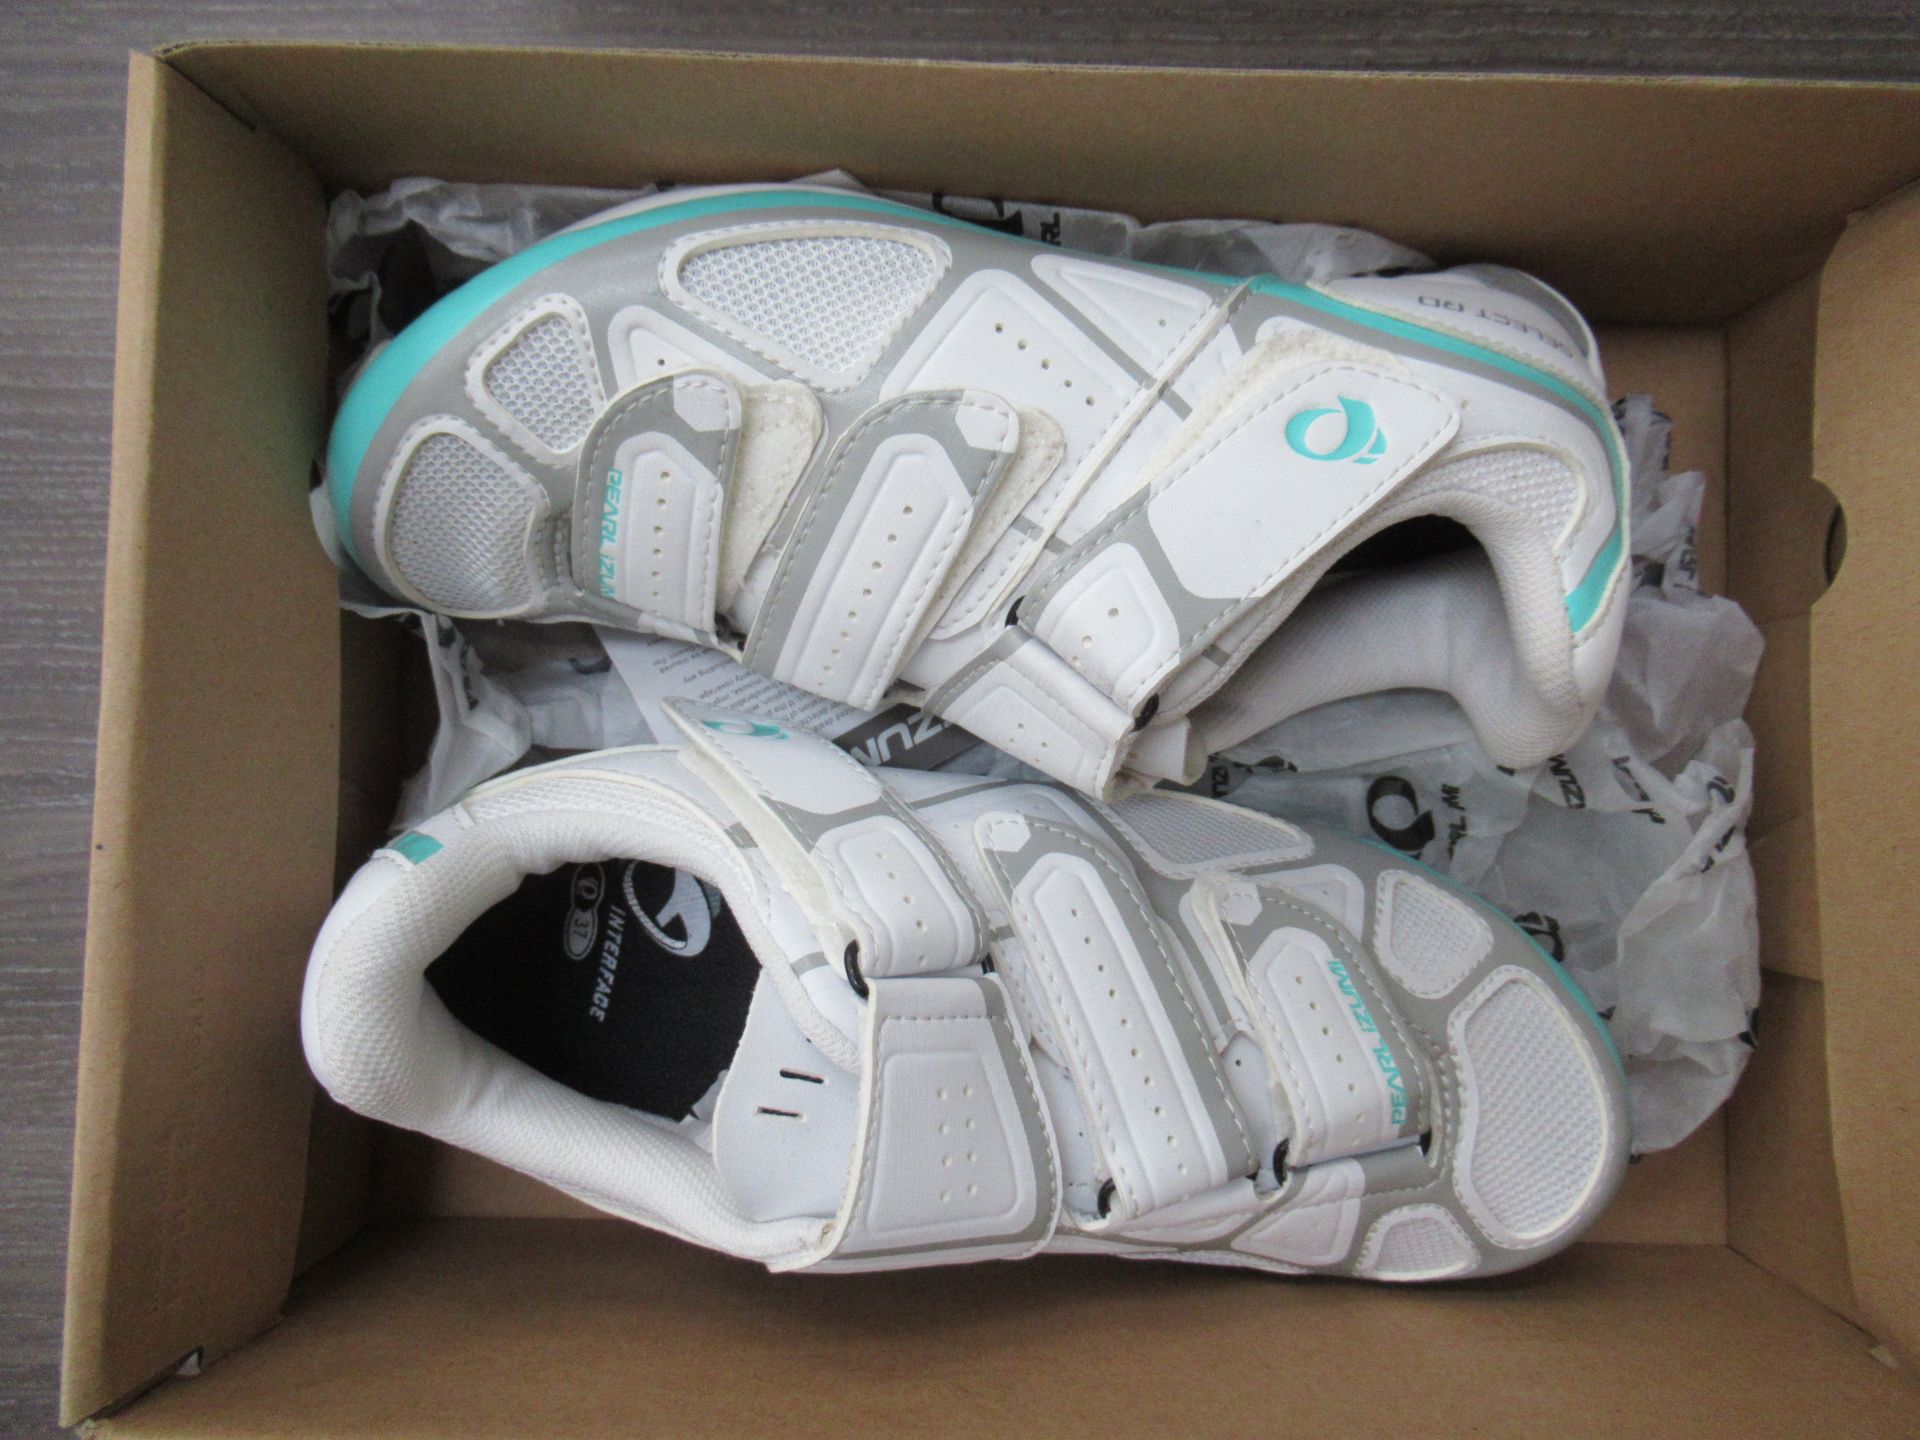 2 x Pairs of ladies cycling shoes: 1 x Lake MX100-W EU size 37 (RRP£79.99) and 1 x Pearl Izumi W Sel - Image 6 of 7